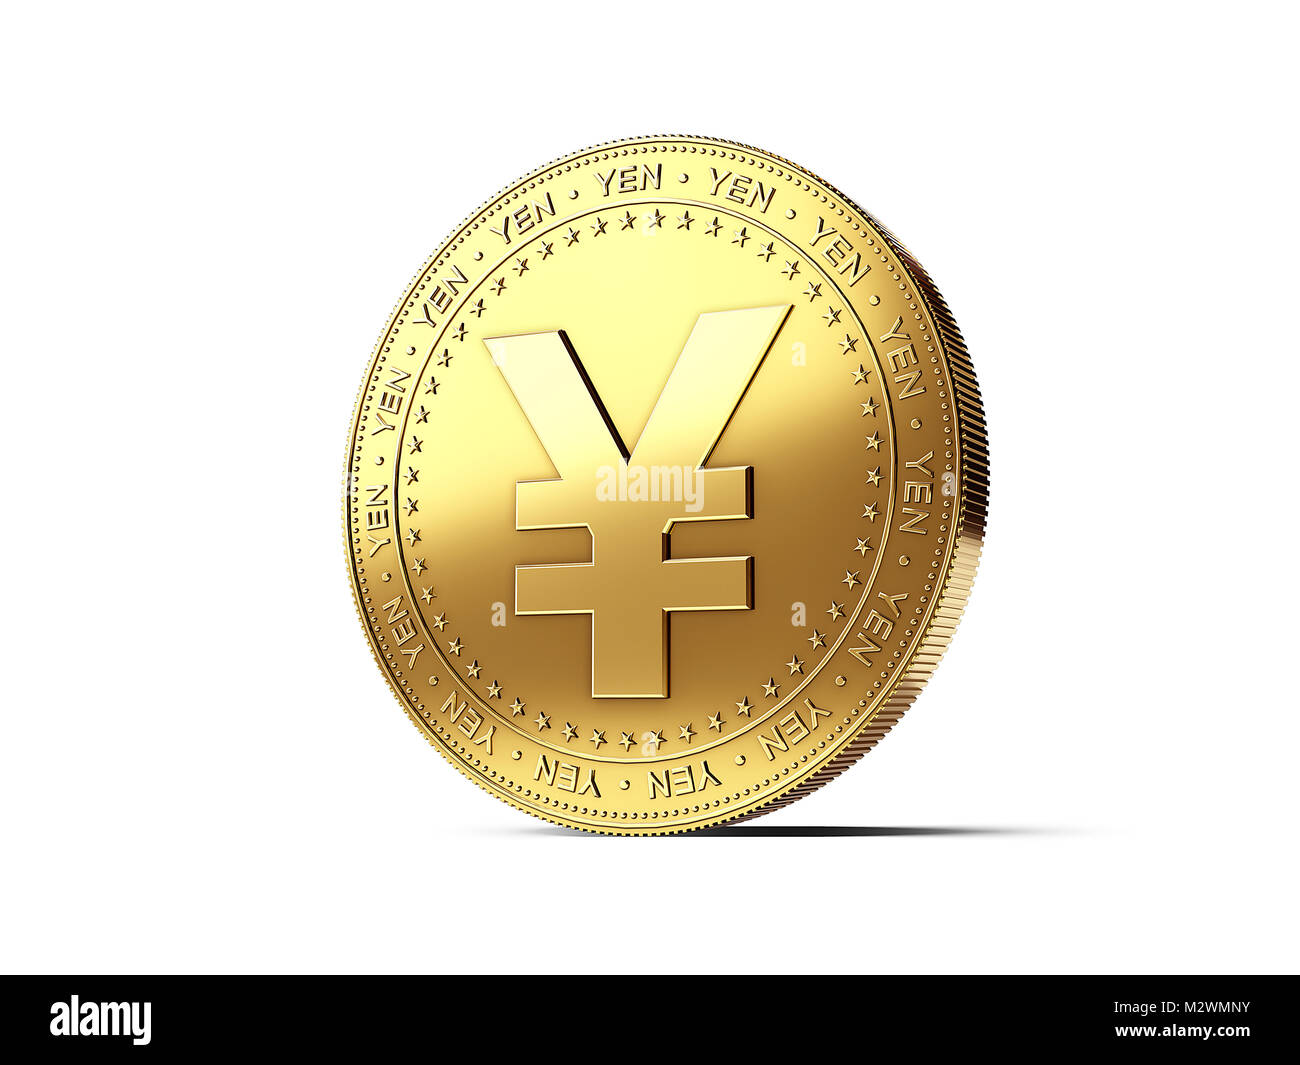 Yen sign on golden coin. Photo realistic 3D rendering isolated on white background Stock Photo